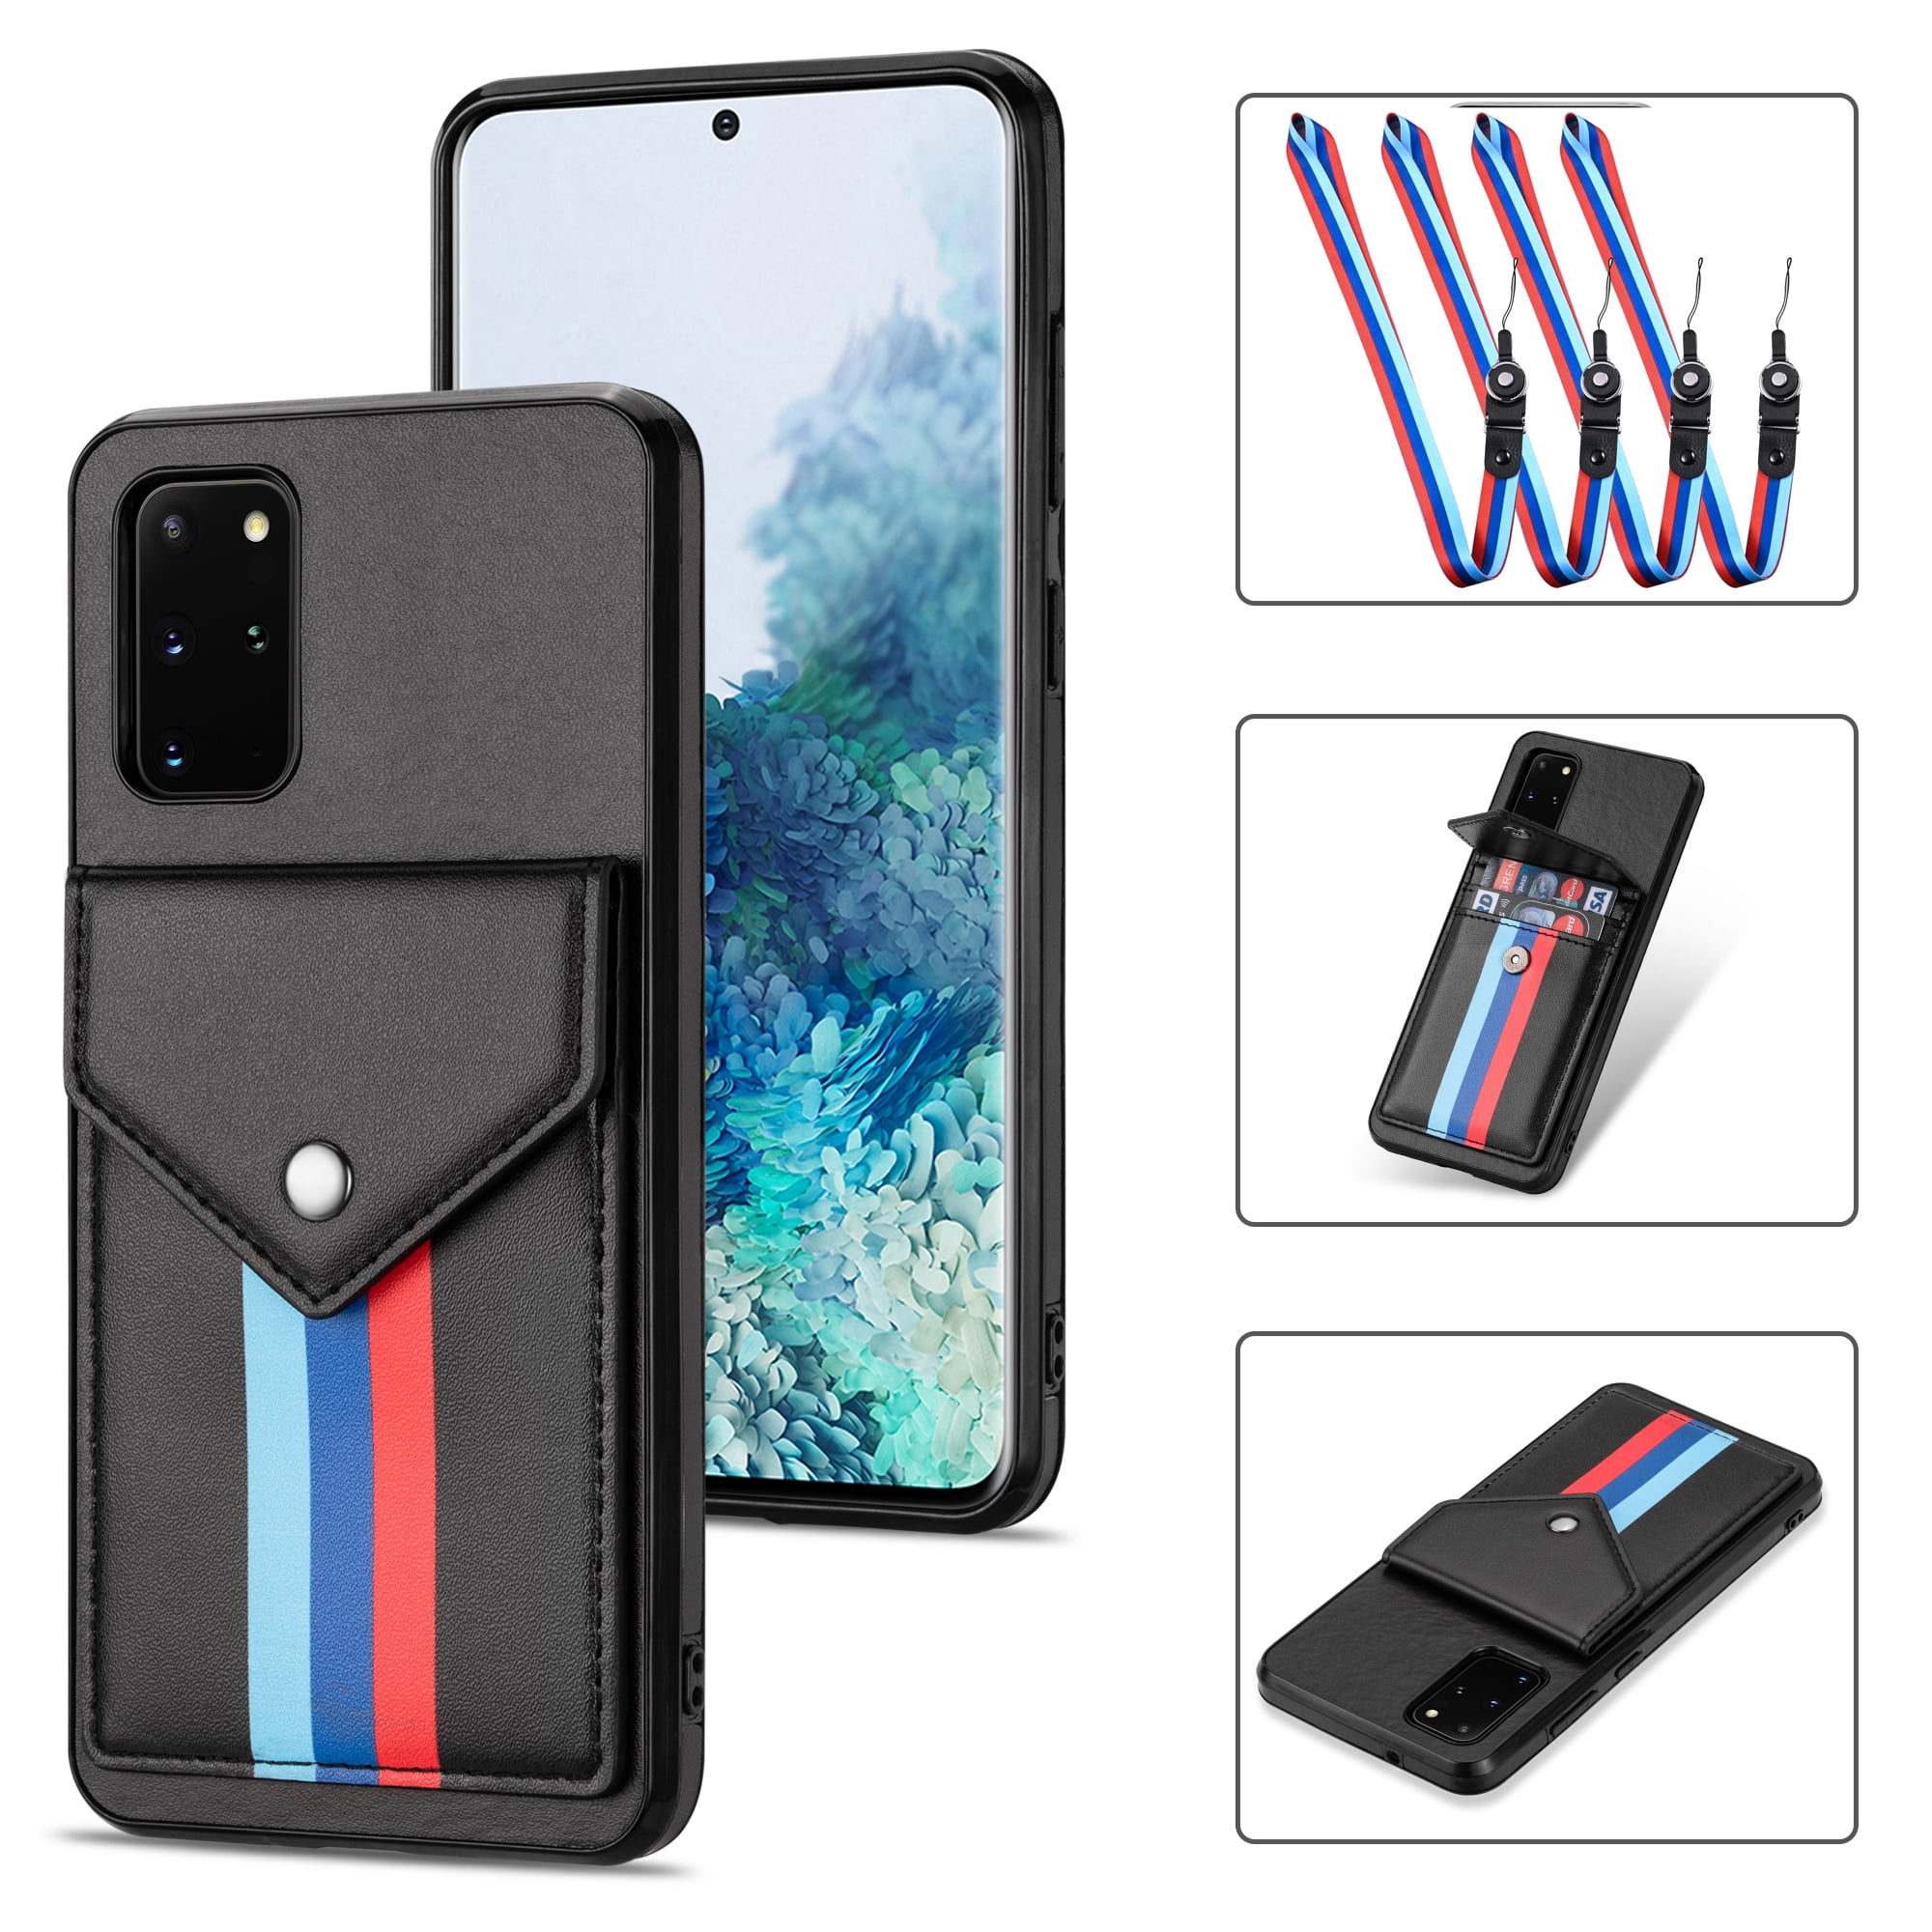 Cover for Huawei P30 Leather Premium Business Card Holders Kickstand Cell Phone case with Free Waterproof-Bag Holistic Huawei P30 Flip Case